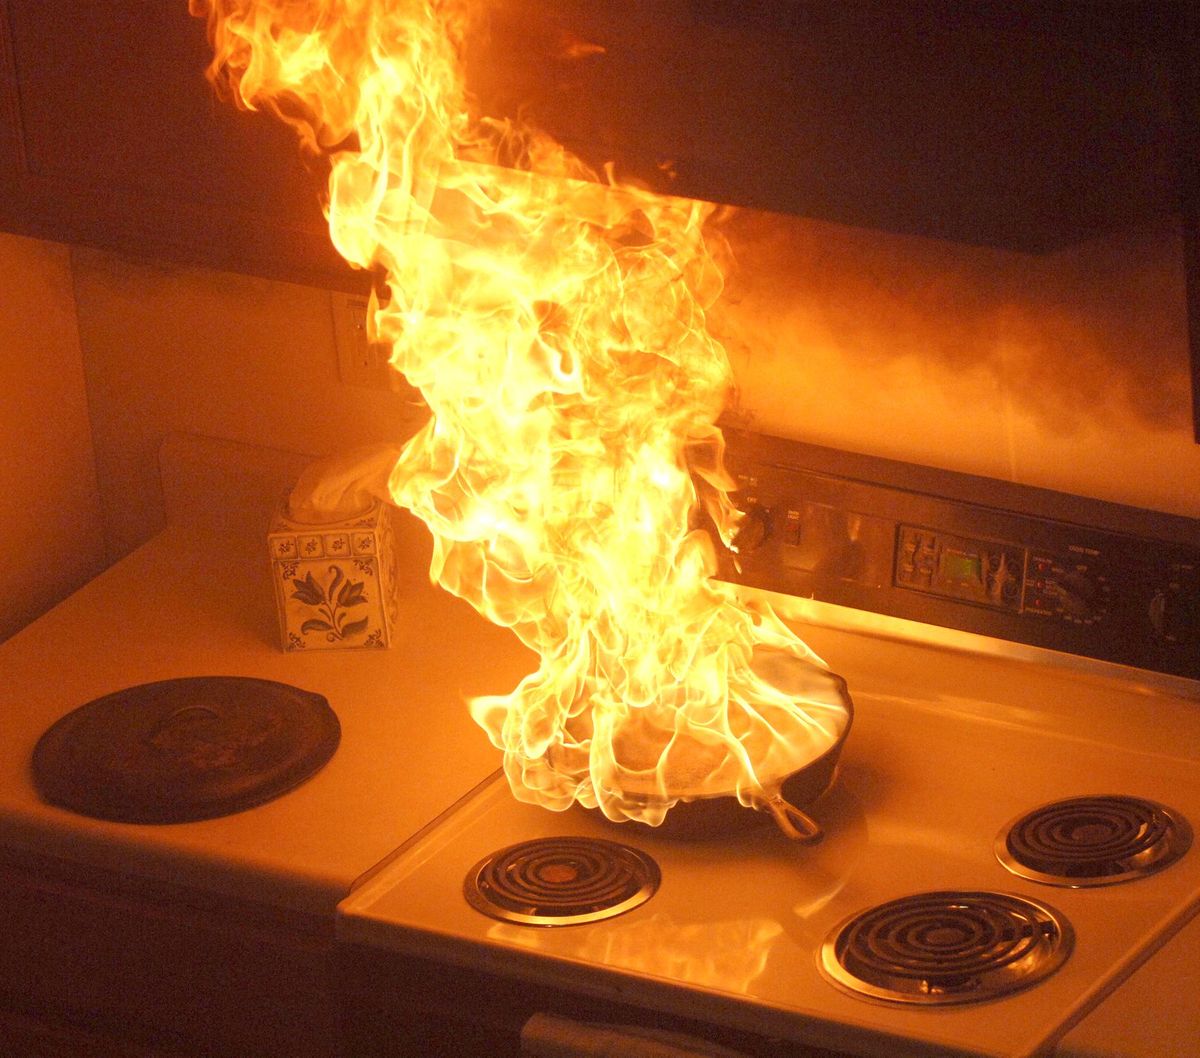 How To Put Out A Kitchen Fire